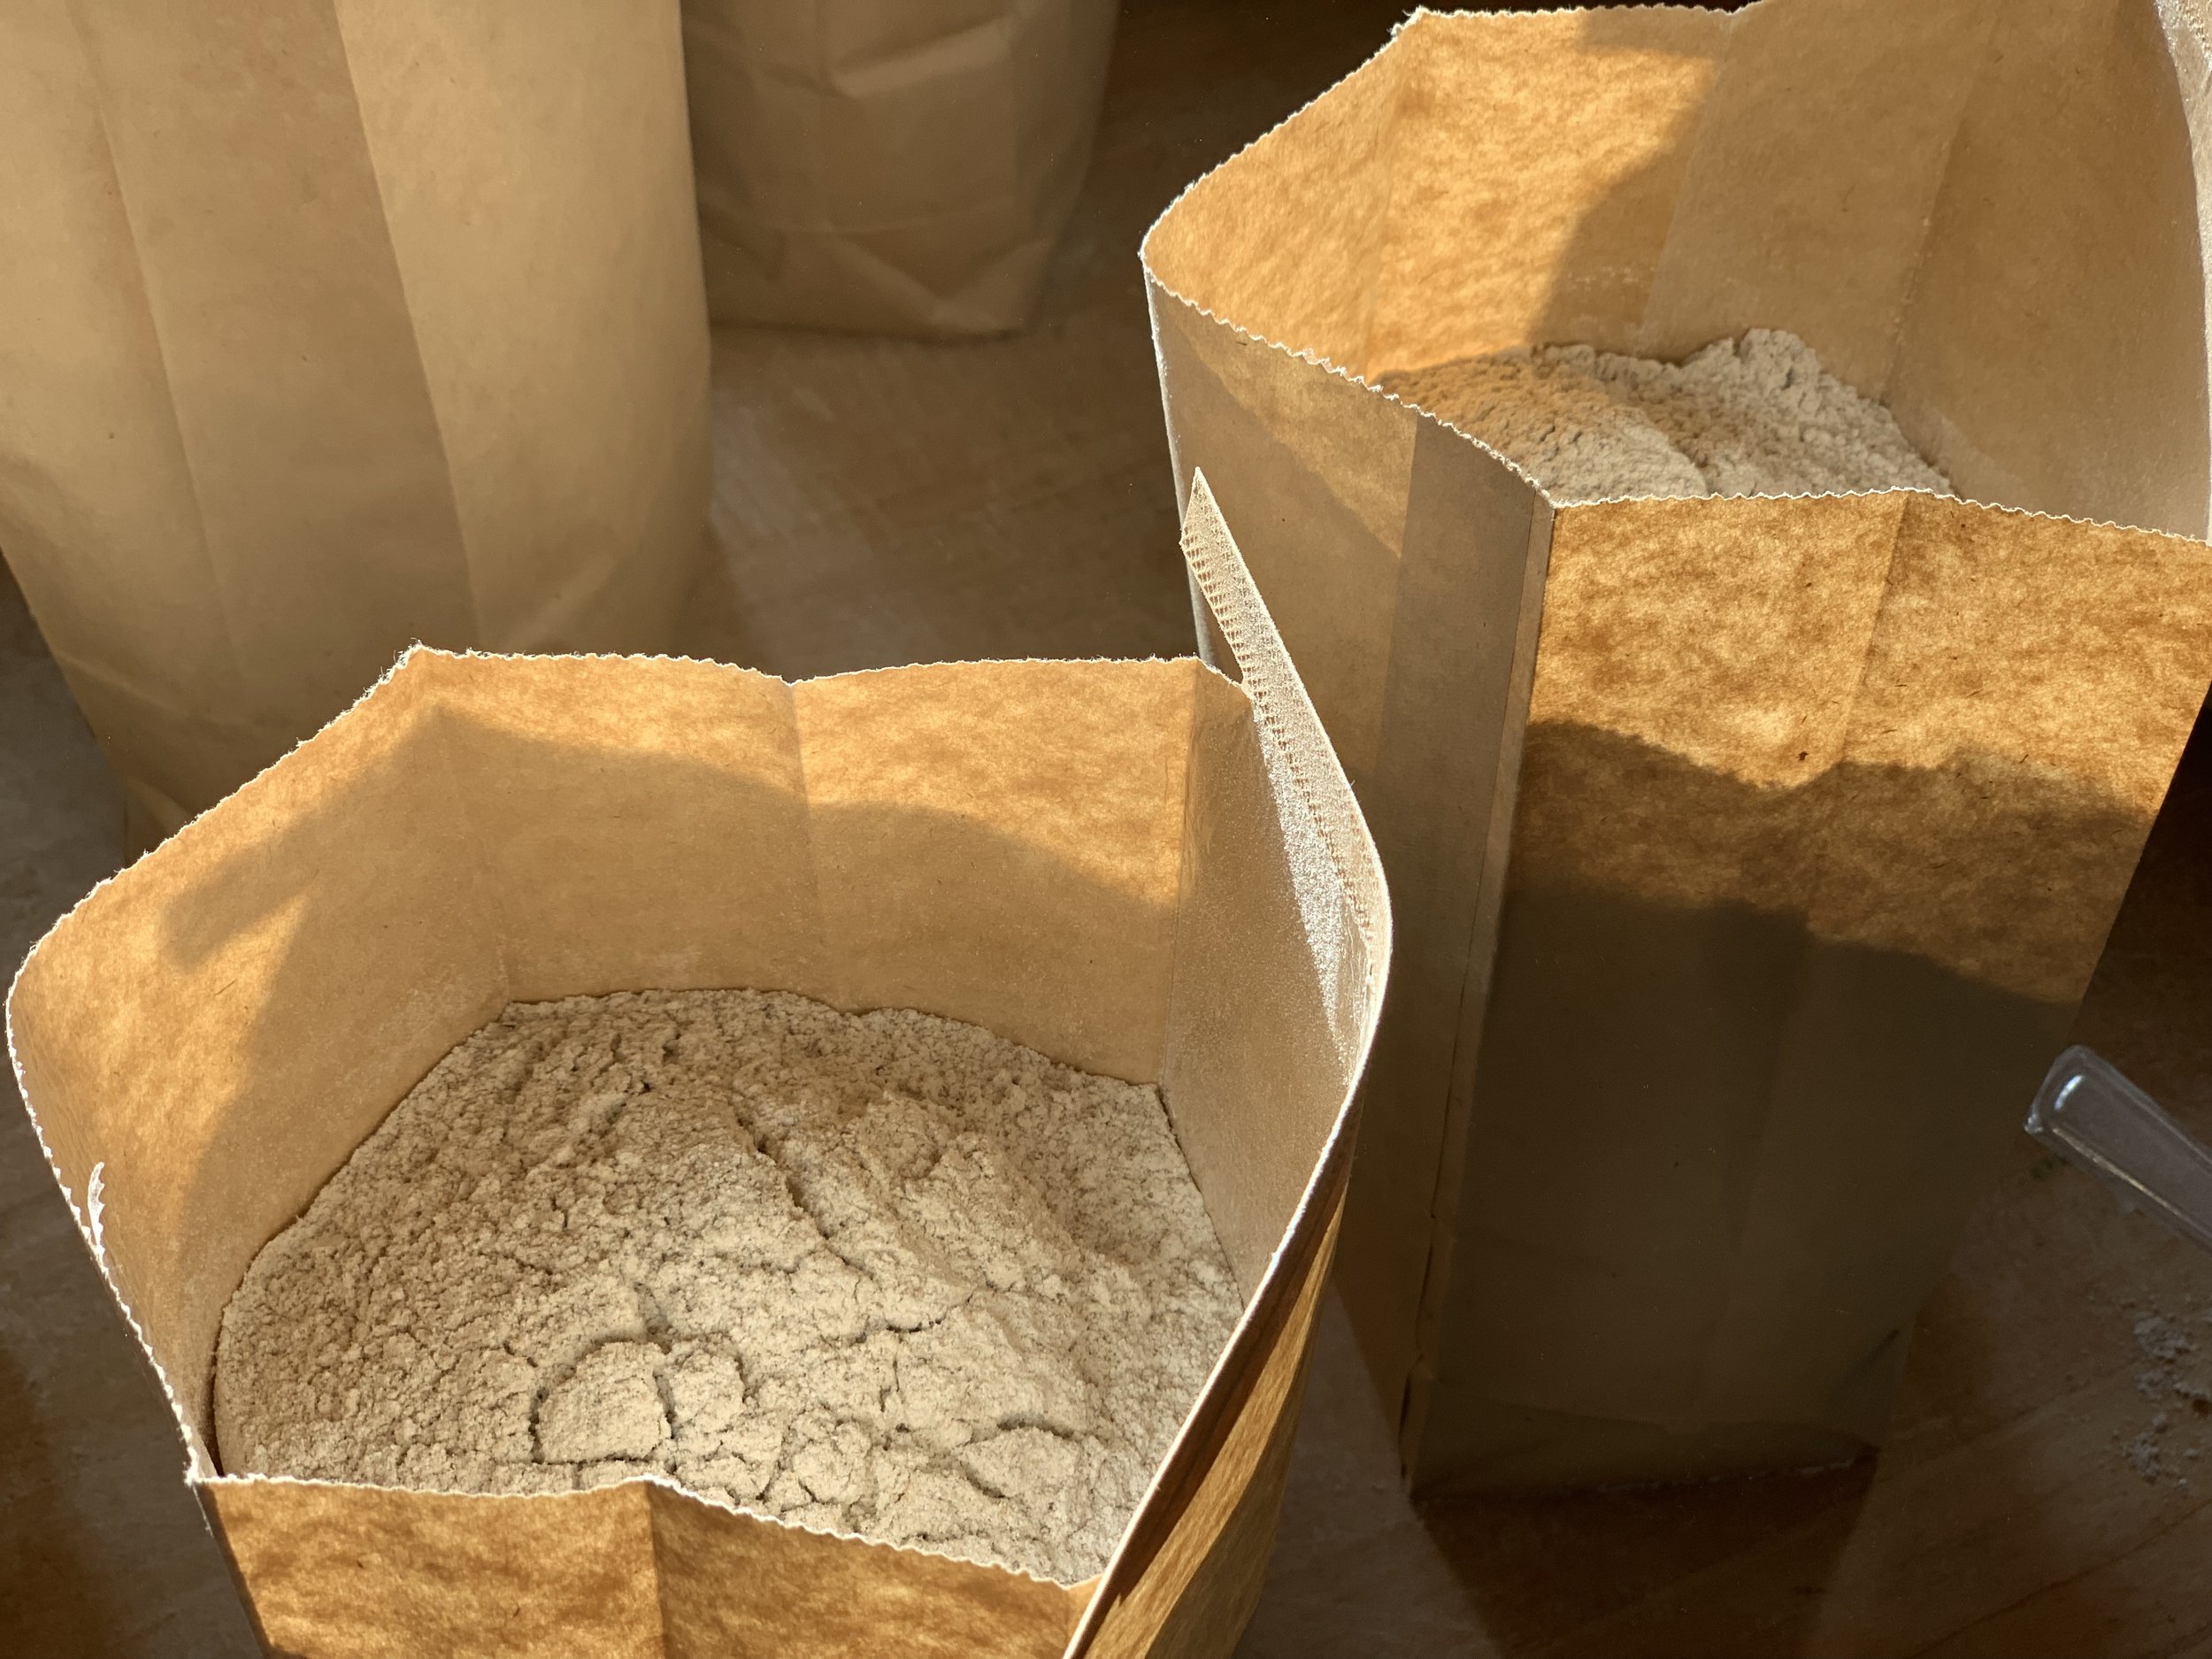 bags of grain ready for sale